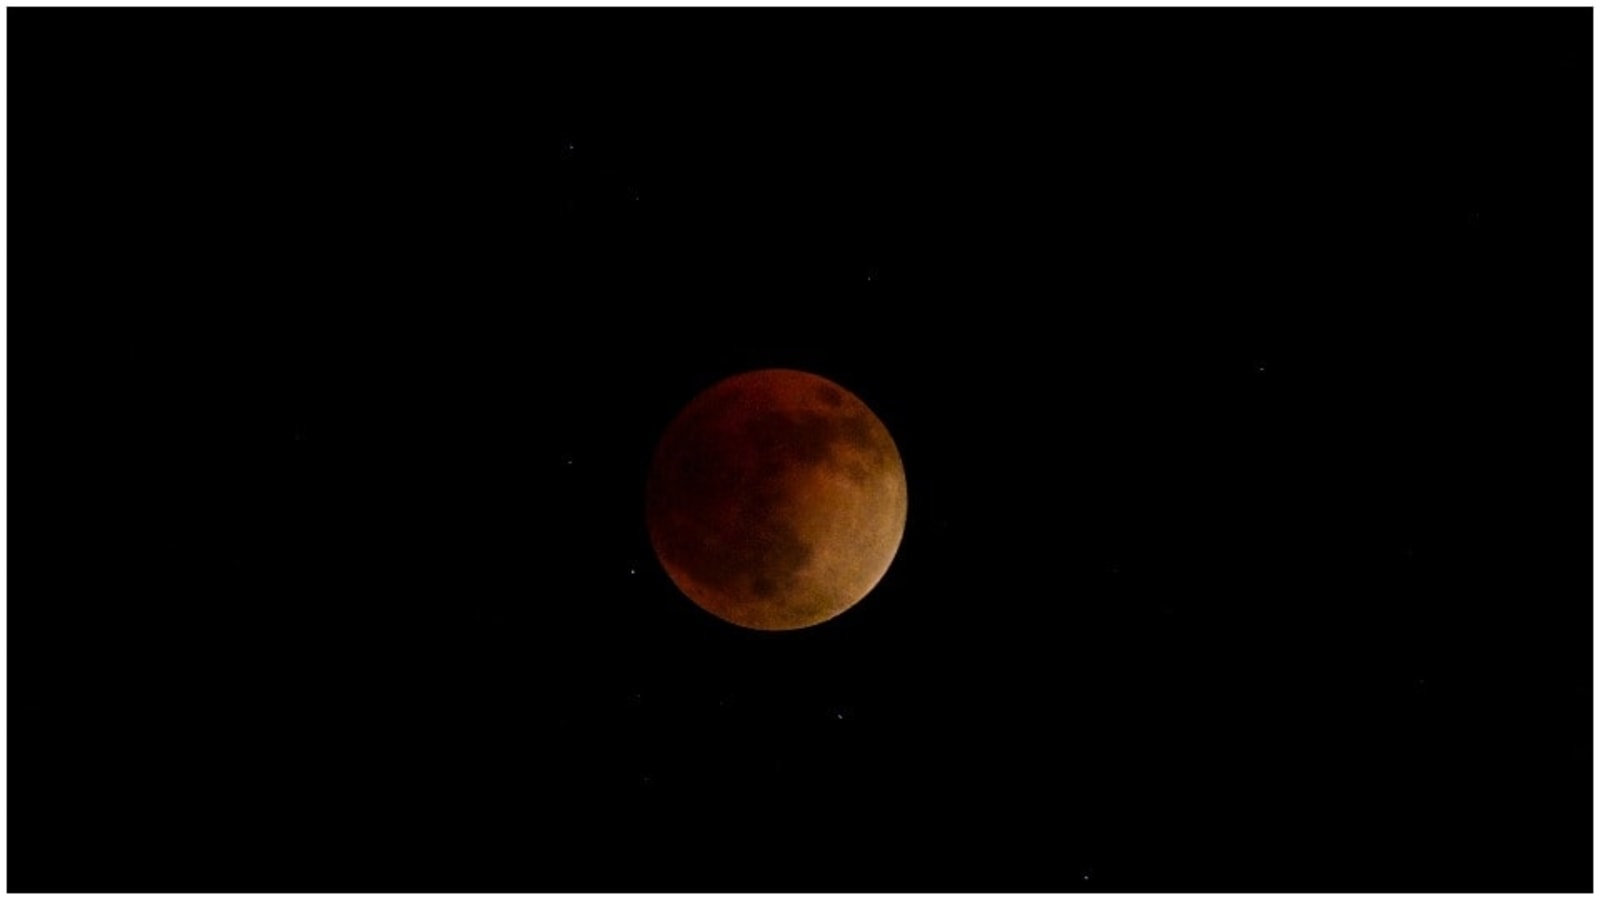 lunar eclipse from the moon